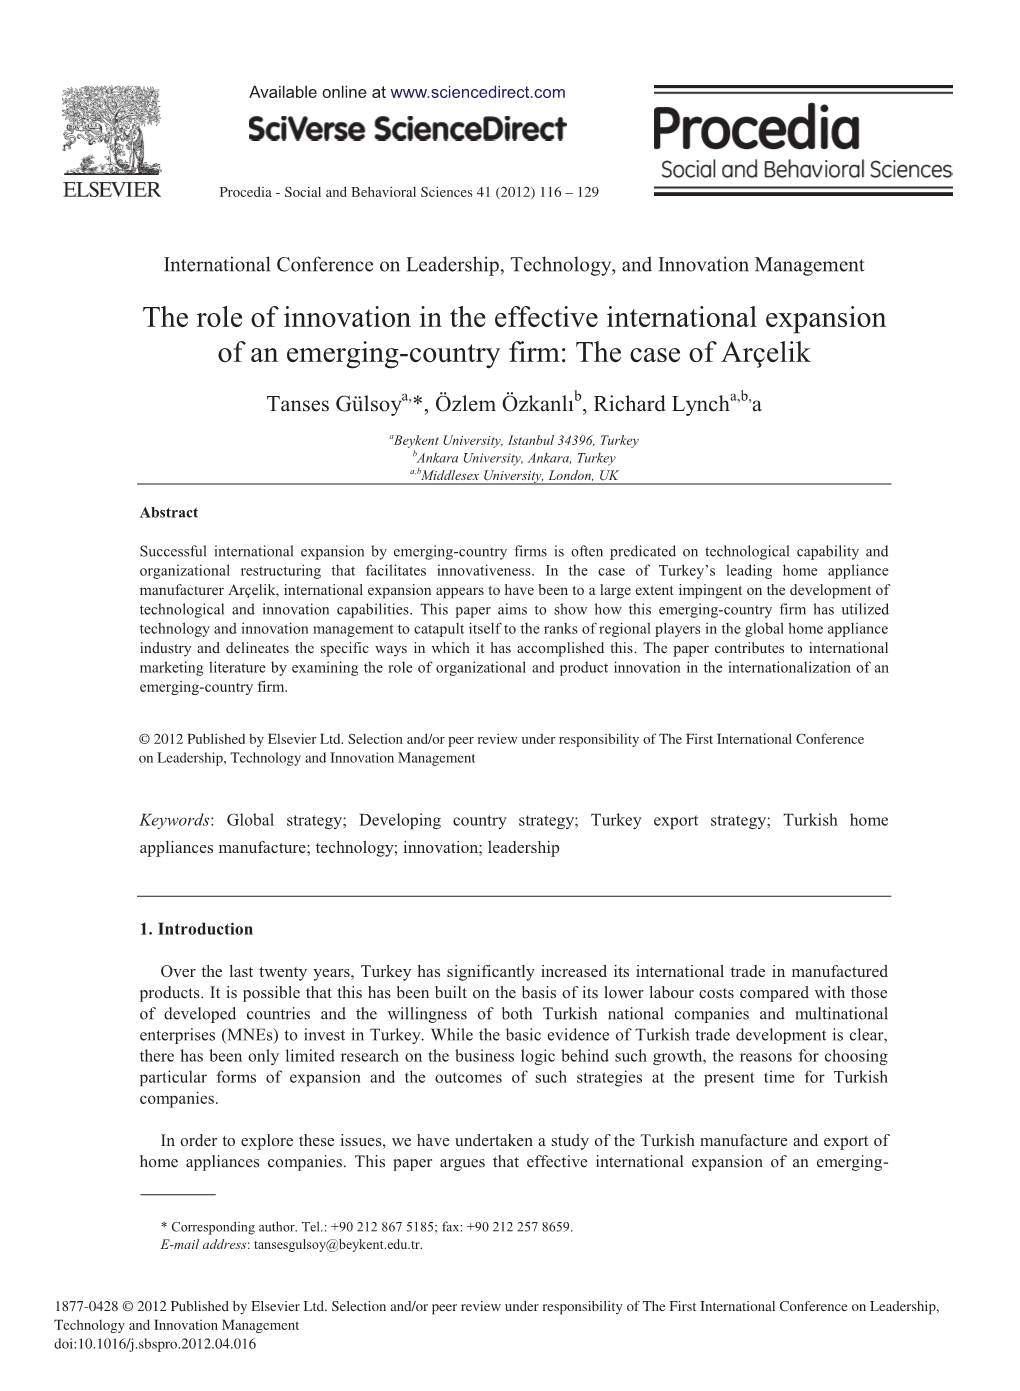 The Role of Innovation in the Effective International Expansion of an Emerging-Country Firm: the Case of Arçelik